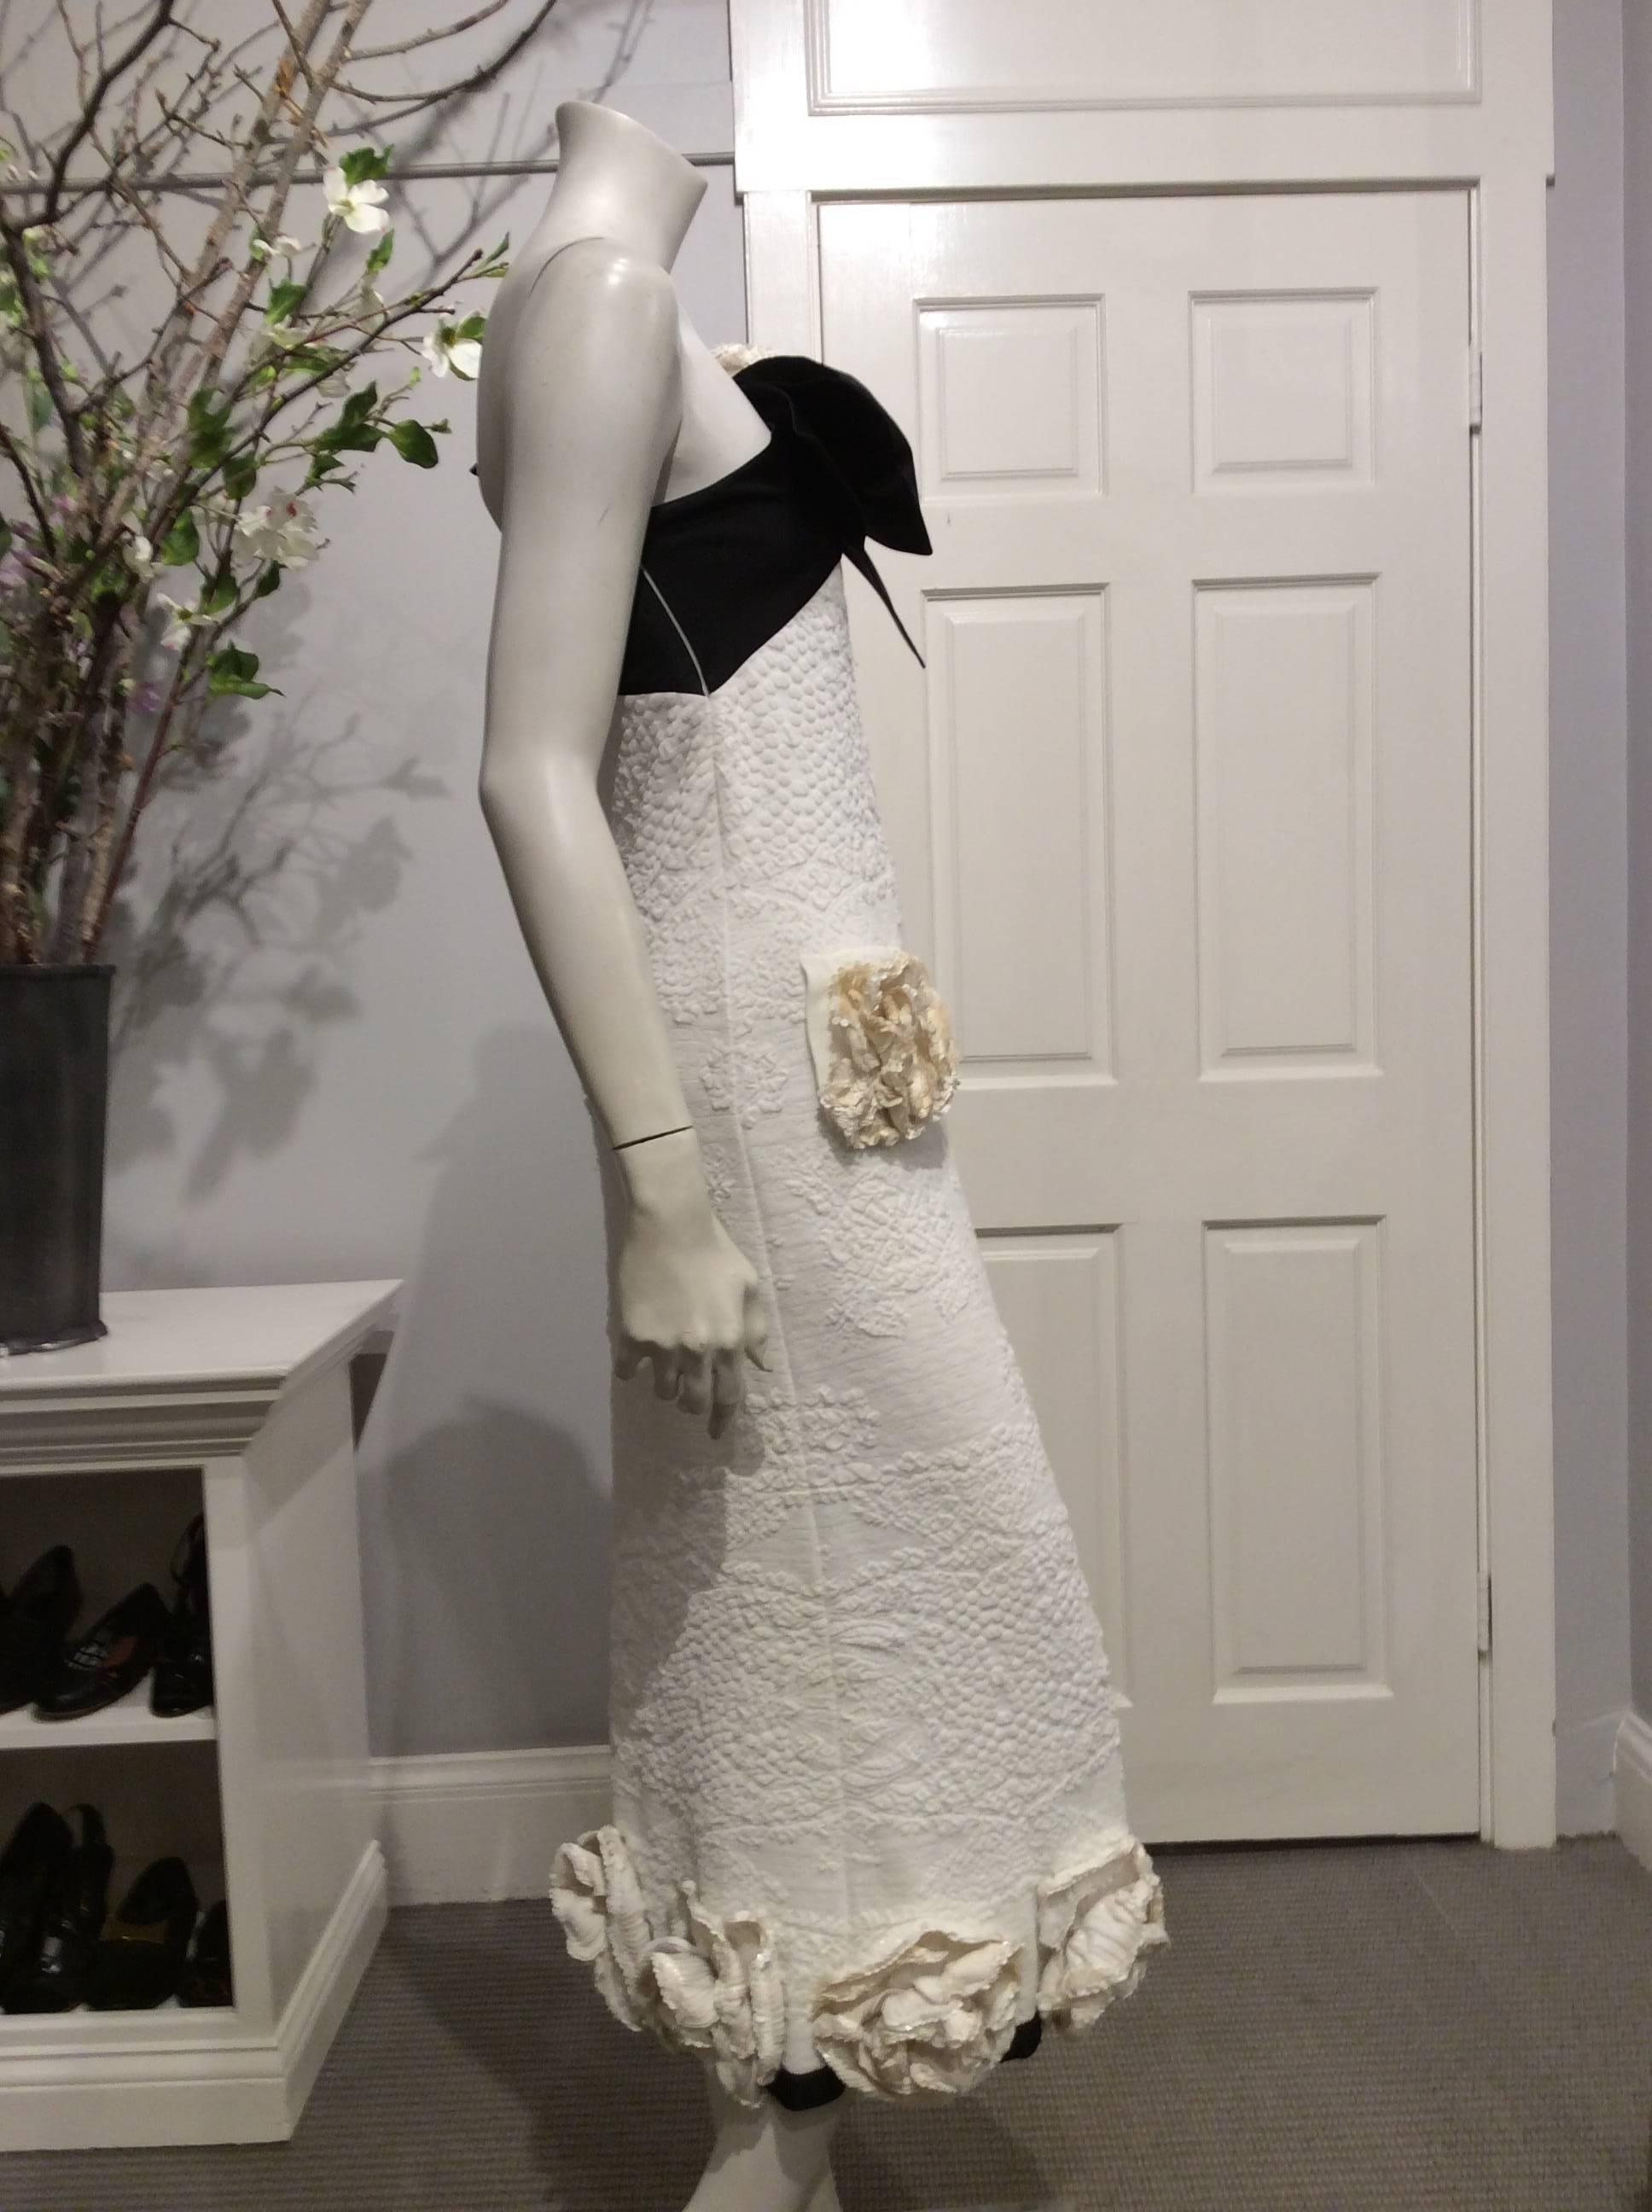 Chanel one shoulder black and white knit gown. The big black bow on the shoulder has a large ivory sequin flower in the middle of it. There are two pockets on the front on the hips hidden with two large sequin flowers. The bottom of the gown is a